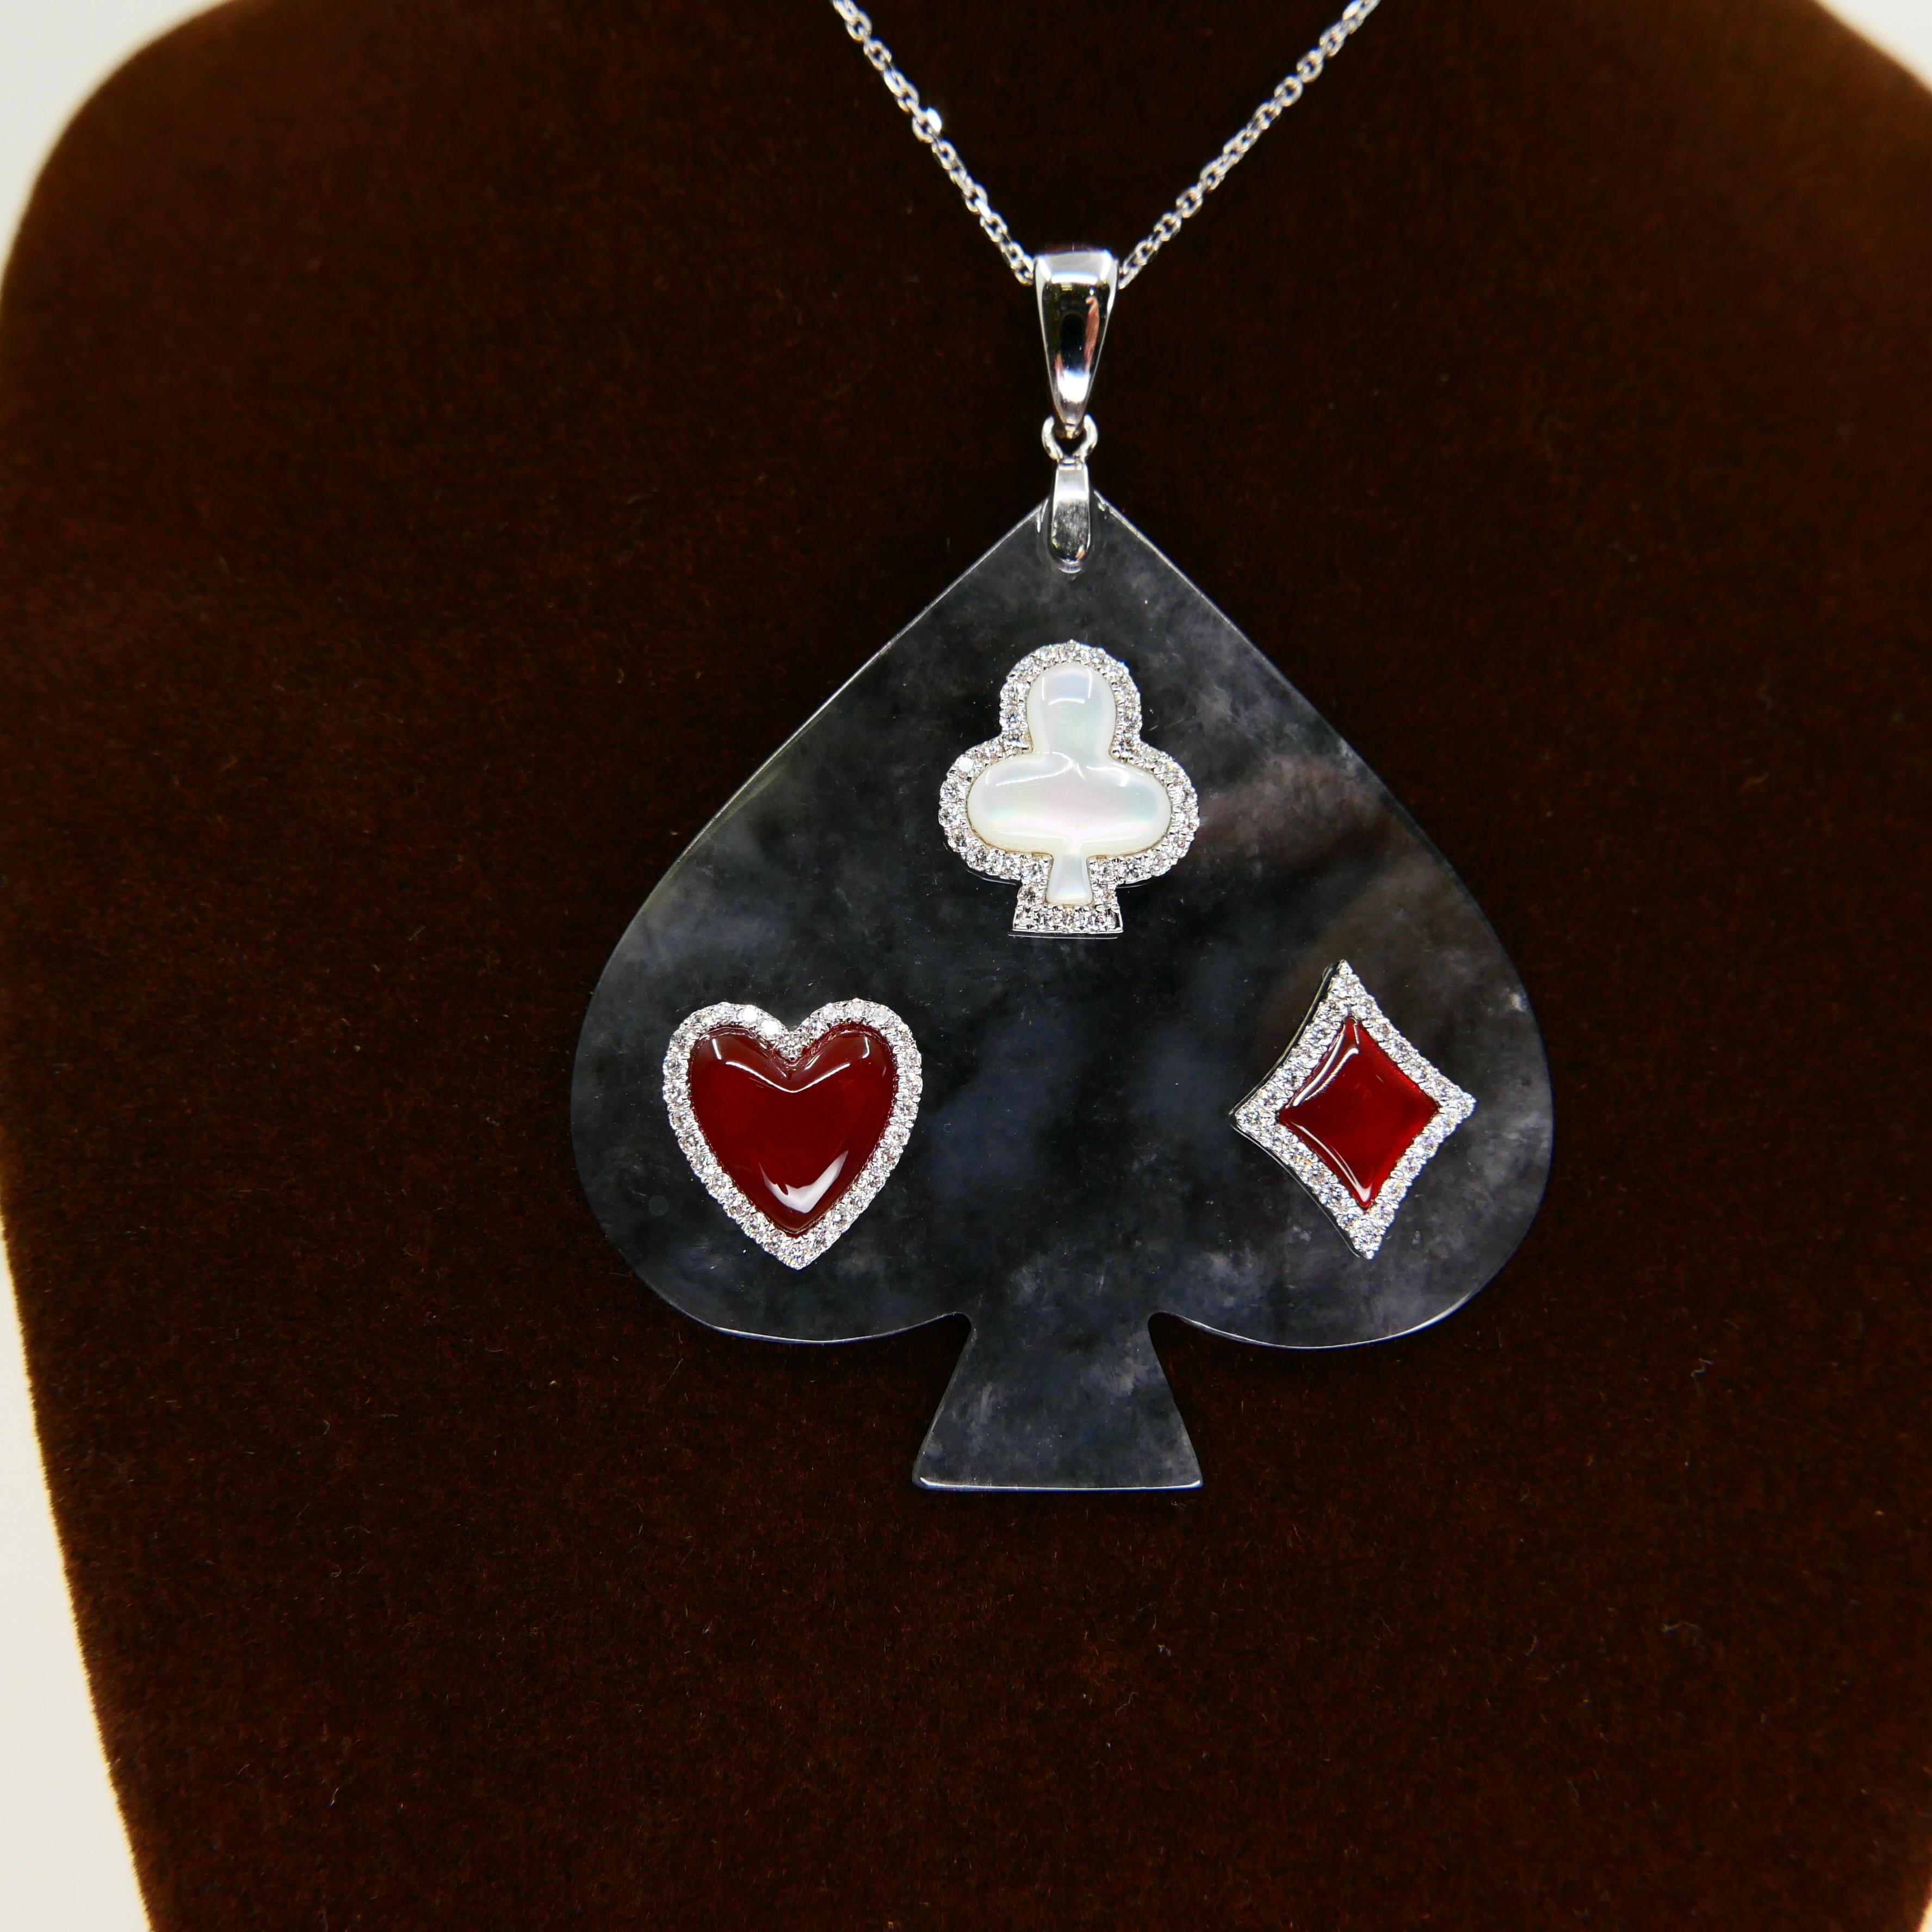 Rough Cut Certified Icy Black Jade, Diamond, Red Agate & MOP Pendant Necklace, Card Suits For Sale